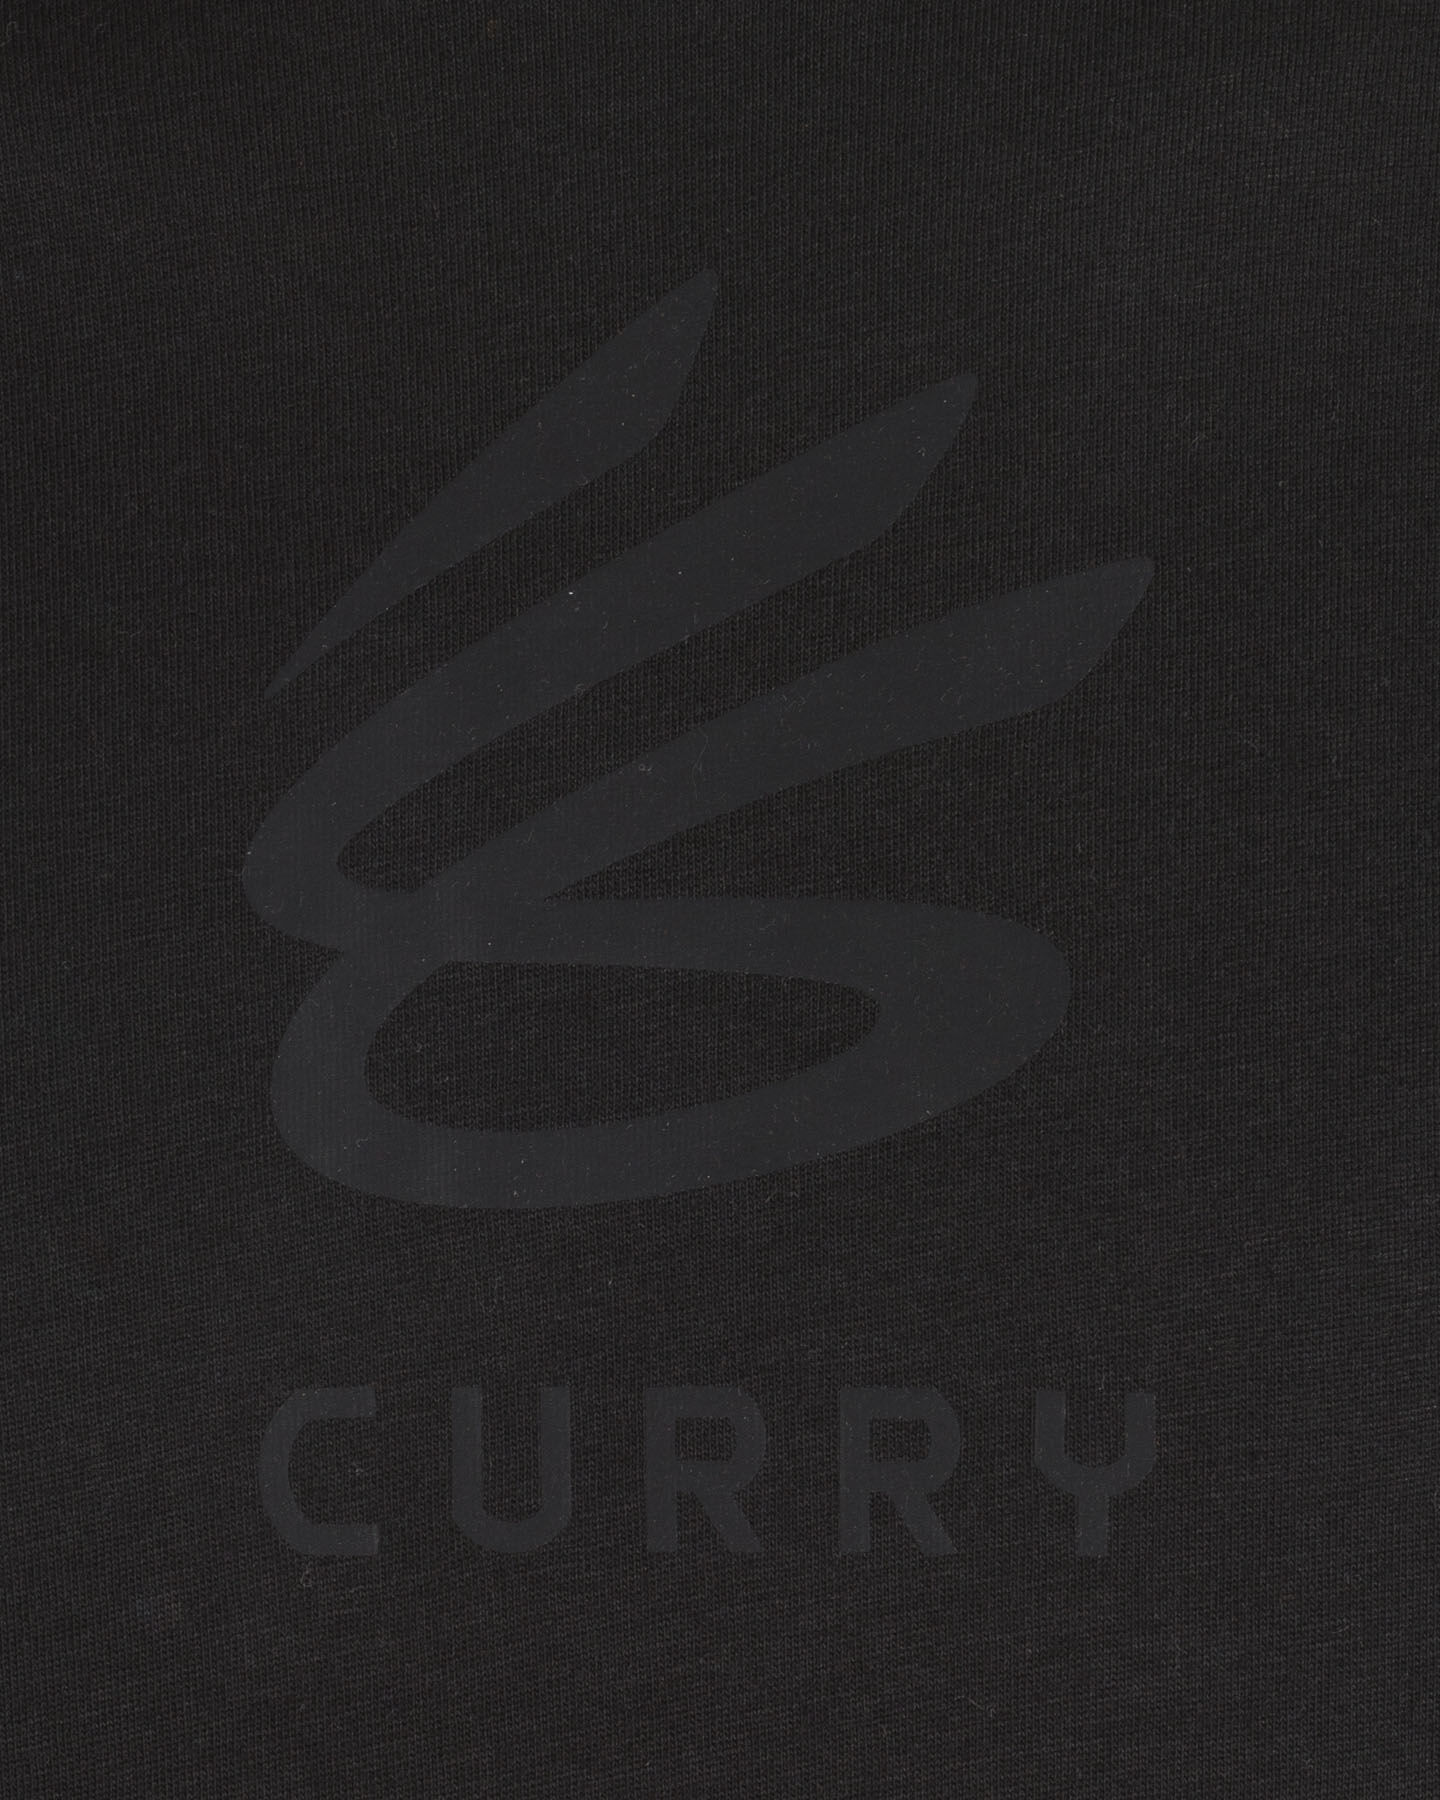  Maglia basket UNDER ARMOUR CURRY LOGO M S5229470 scatto 2